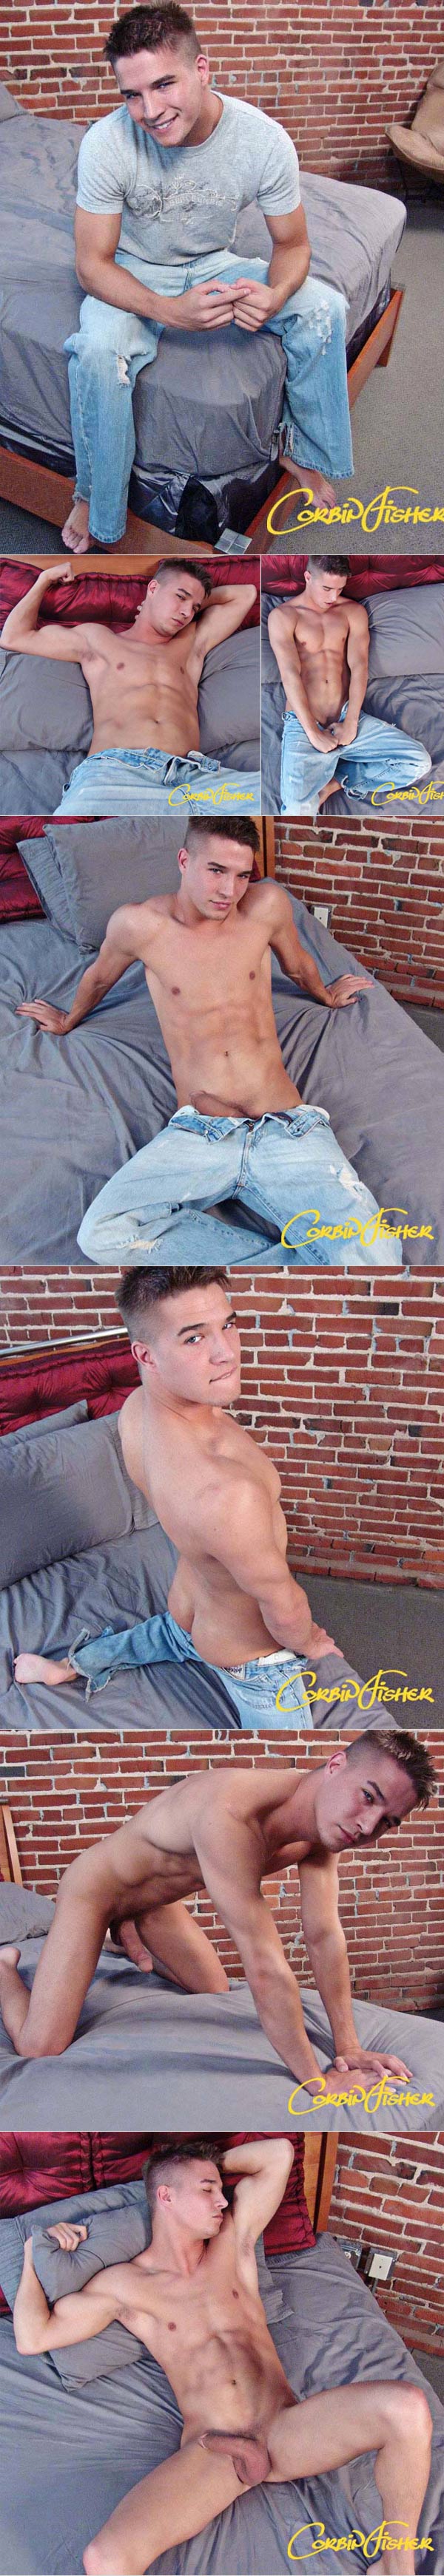 Jeremy's Audition at CorbinFisher